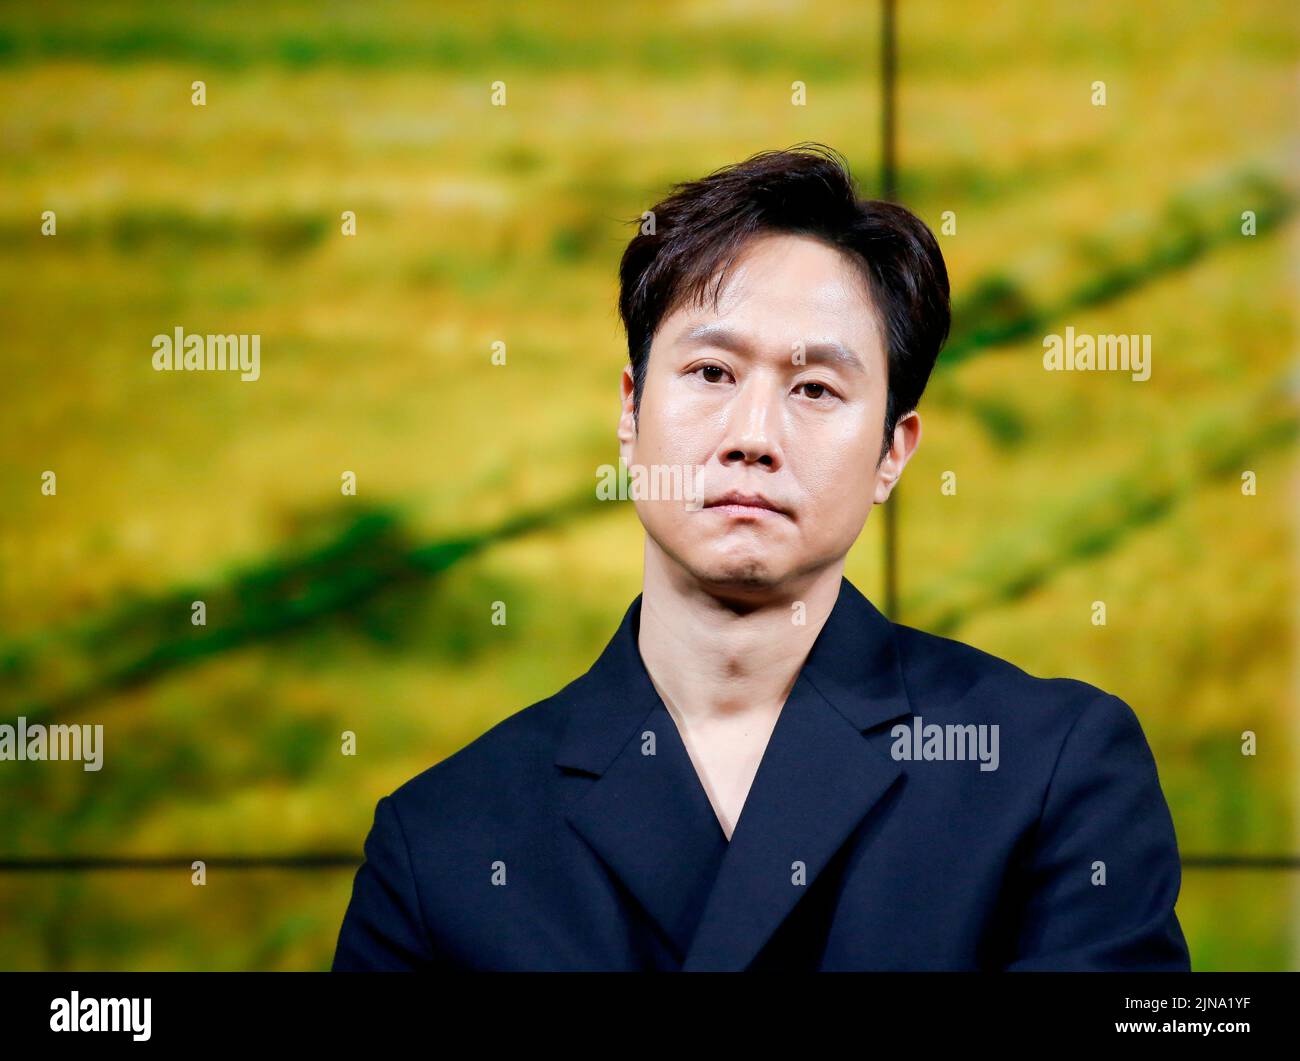 Jung Woo, August 9, 2022 : South Korean actor Jung Woo attends a production press conference for upcoming Netflix original series 'A Model Family' in Seoul, South Korea. Credit: Lee Jae-Won/AFLO/Alamy Live News Stock Photo